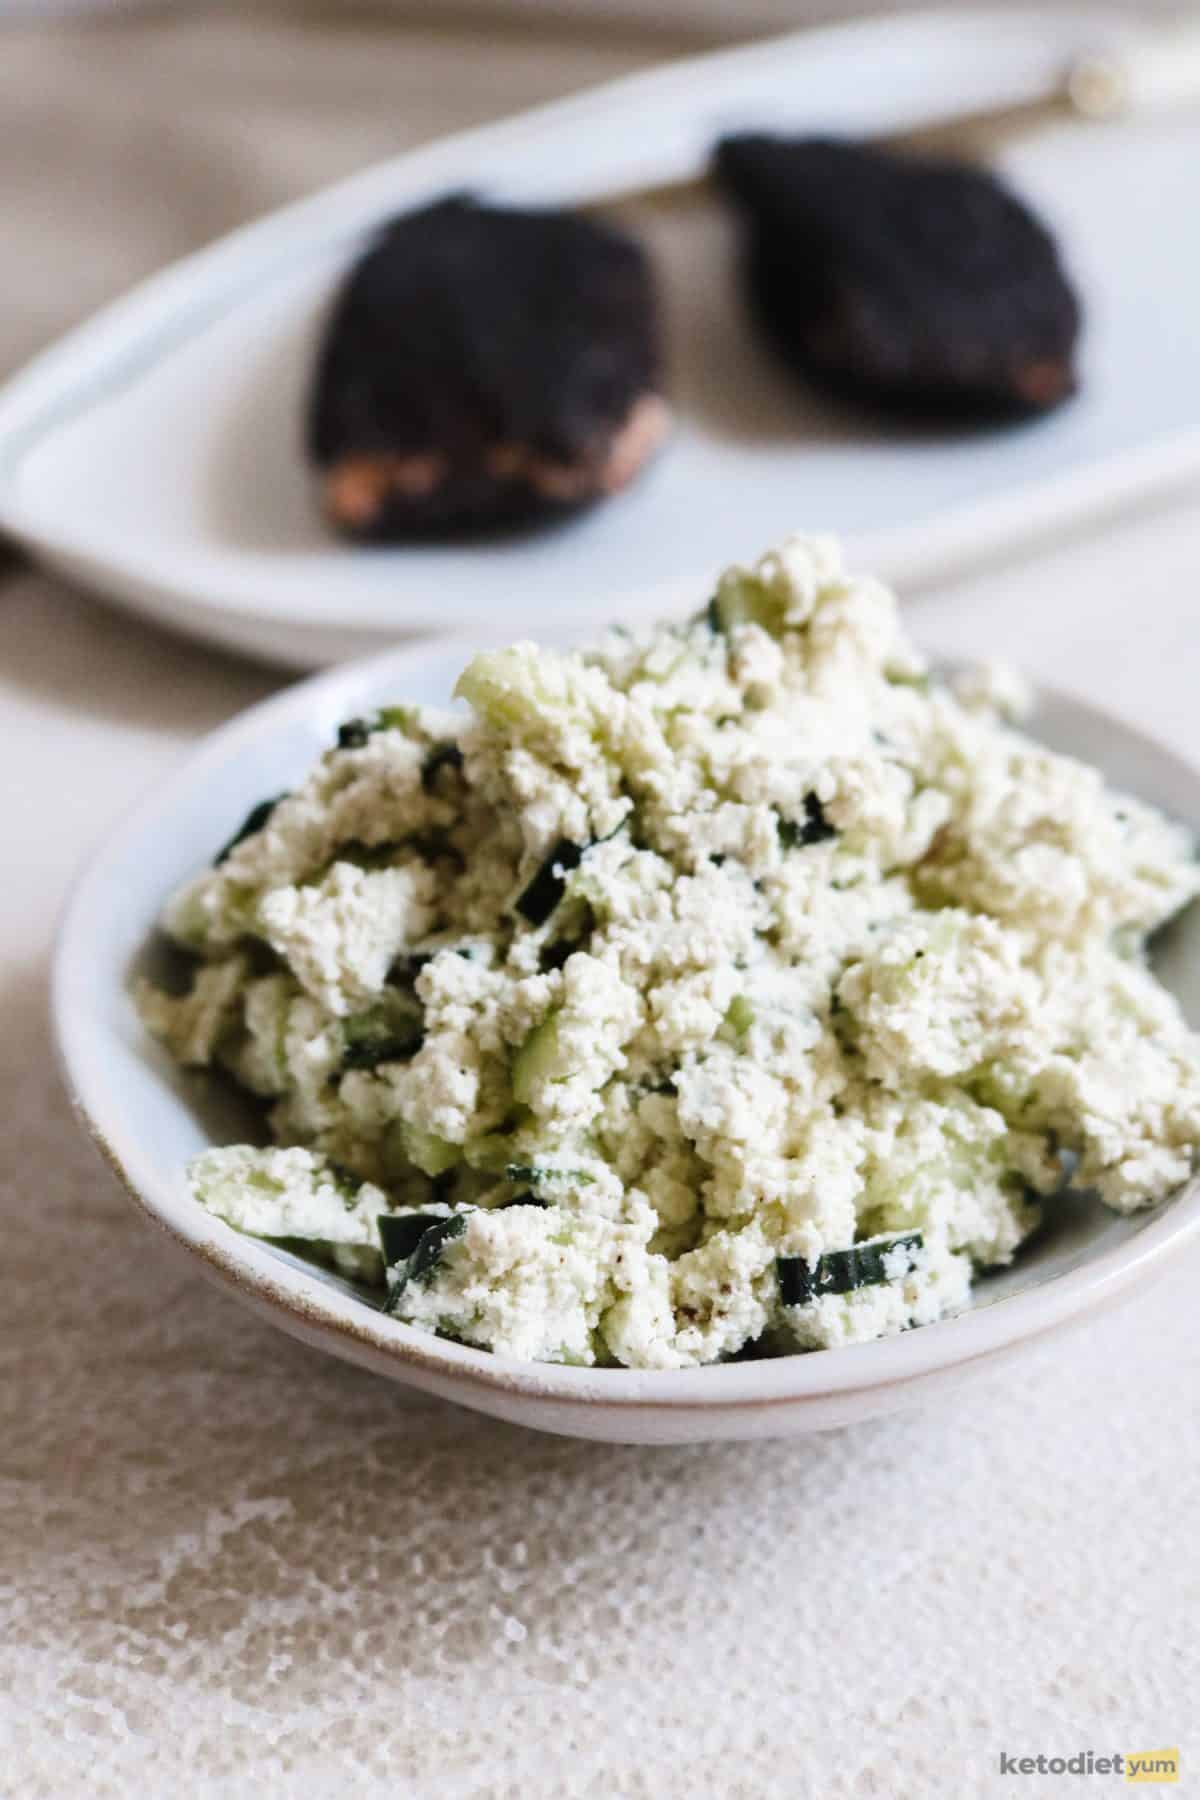 A simple and refreshing goat cheese dip made with goat cheese, cucumber, olive oil and seasoned with salt and pepper